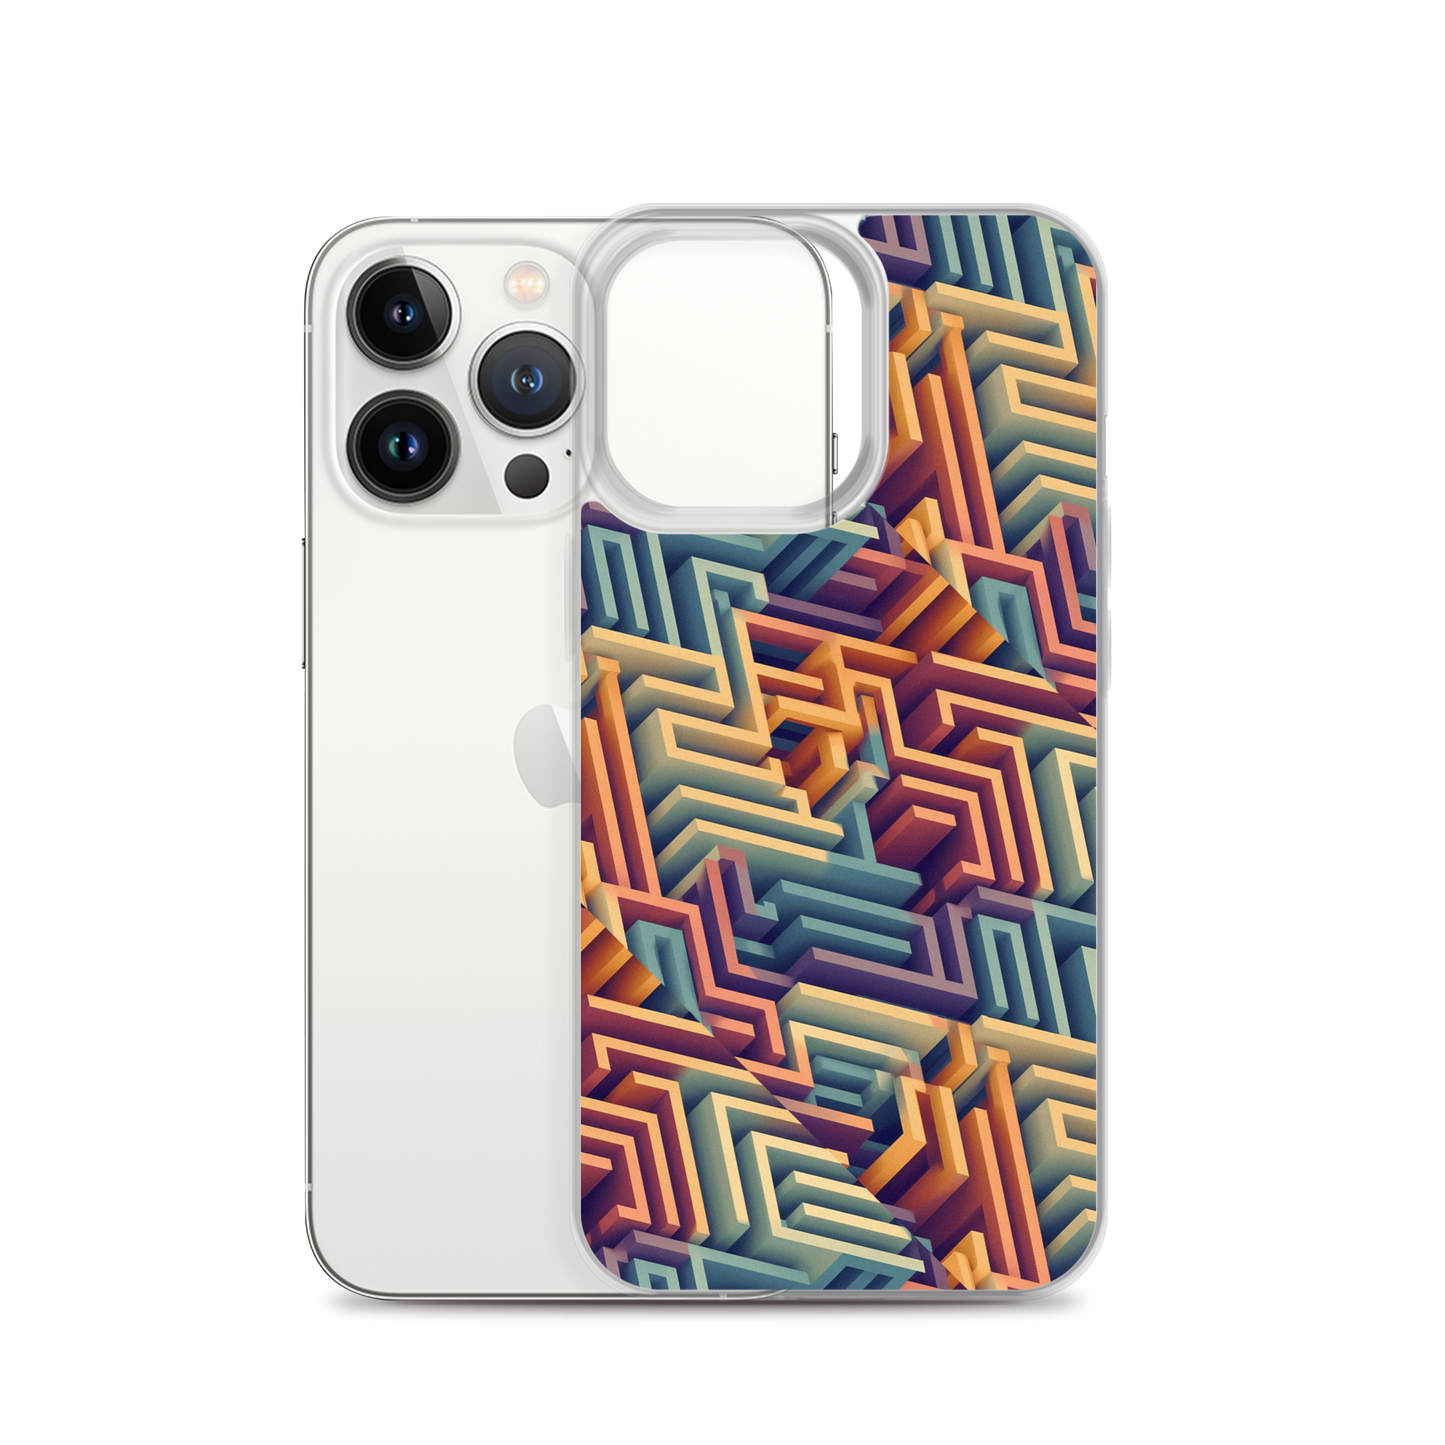 3D Maze Illusion | 3D Patterns | Clear Case for iPhone - #4